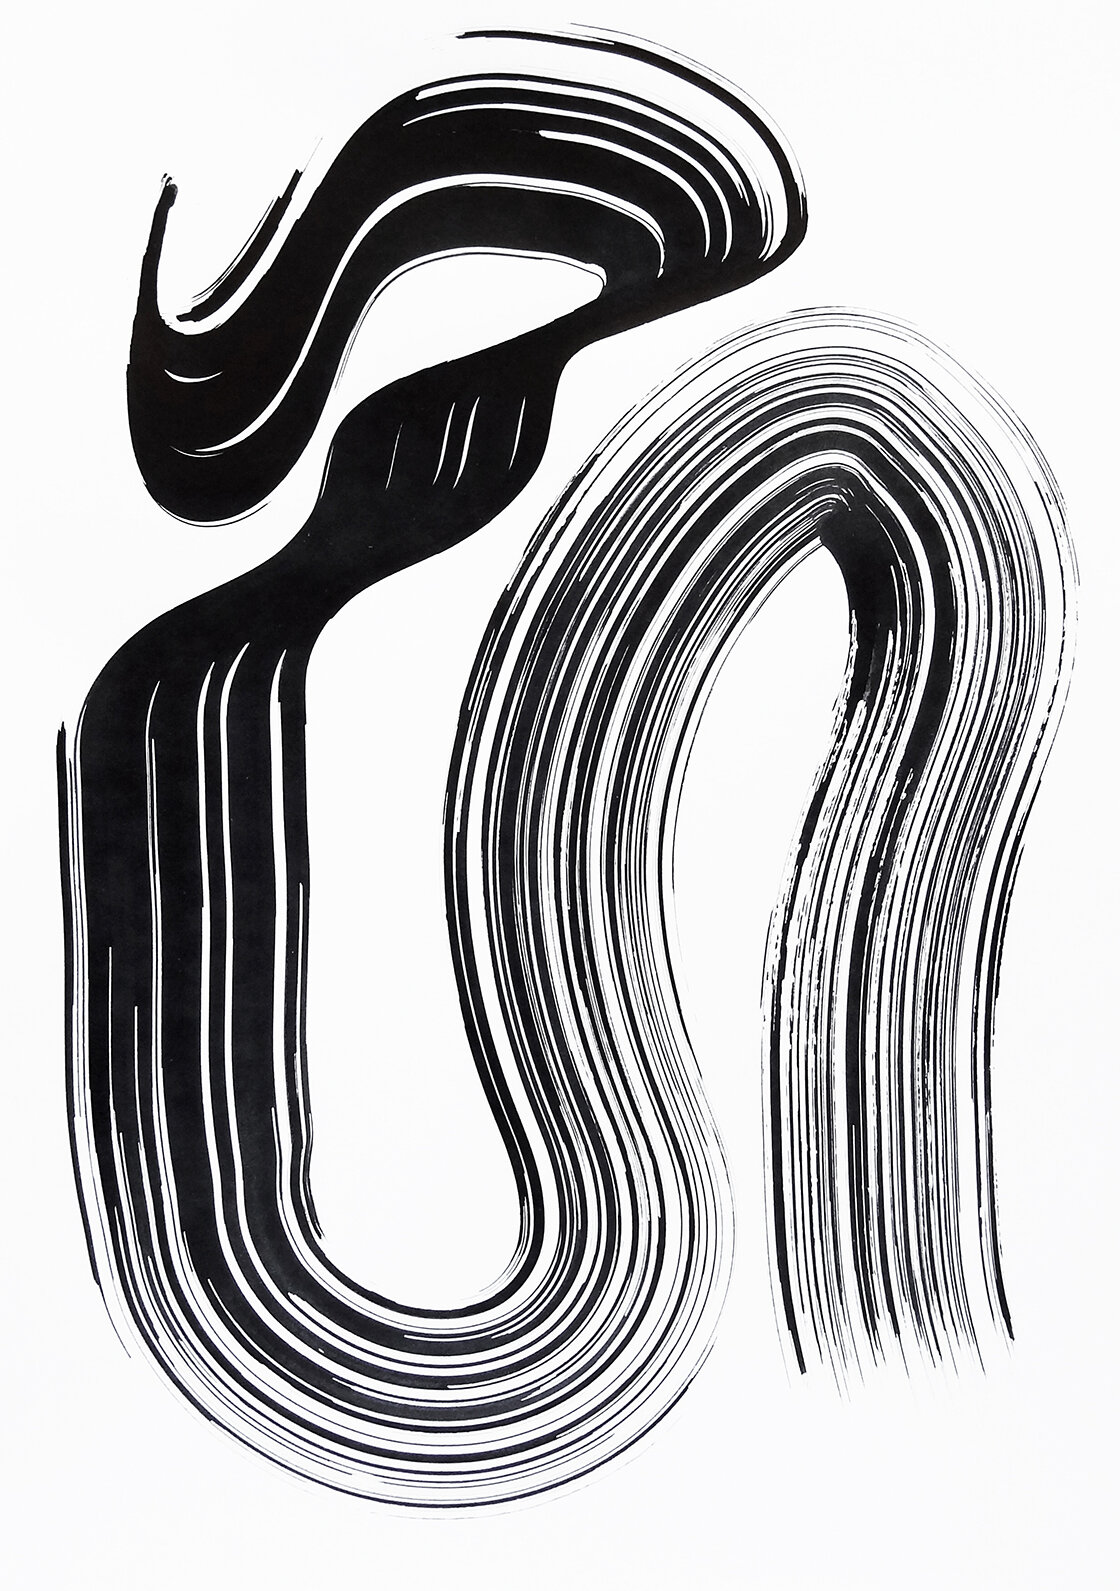  Untitled, 2020 strokes series calligraphy ink on paper 42,0 x 29,7 cm (19-20) 